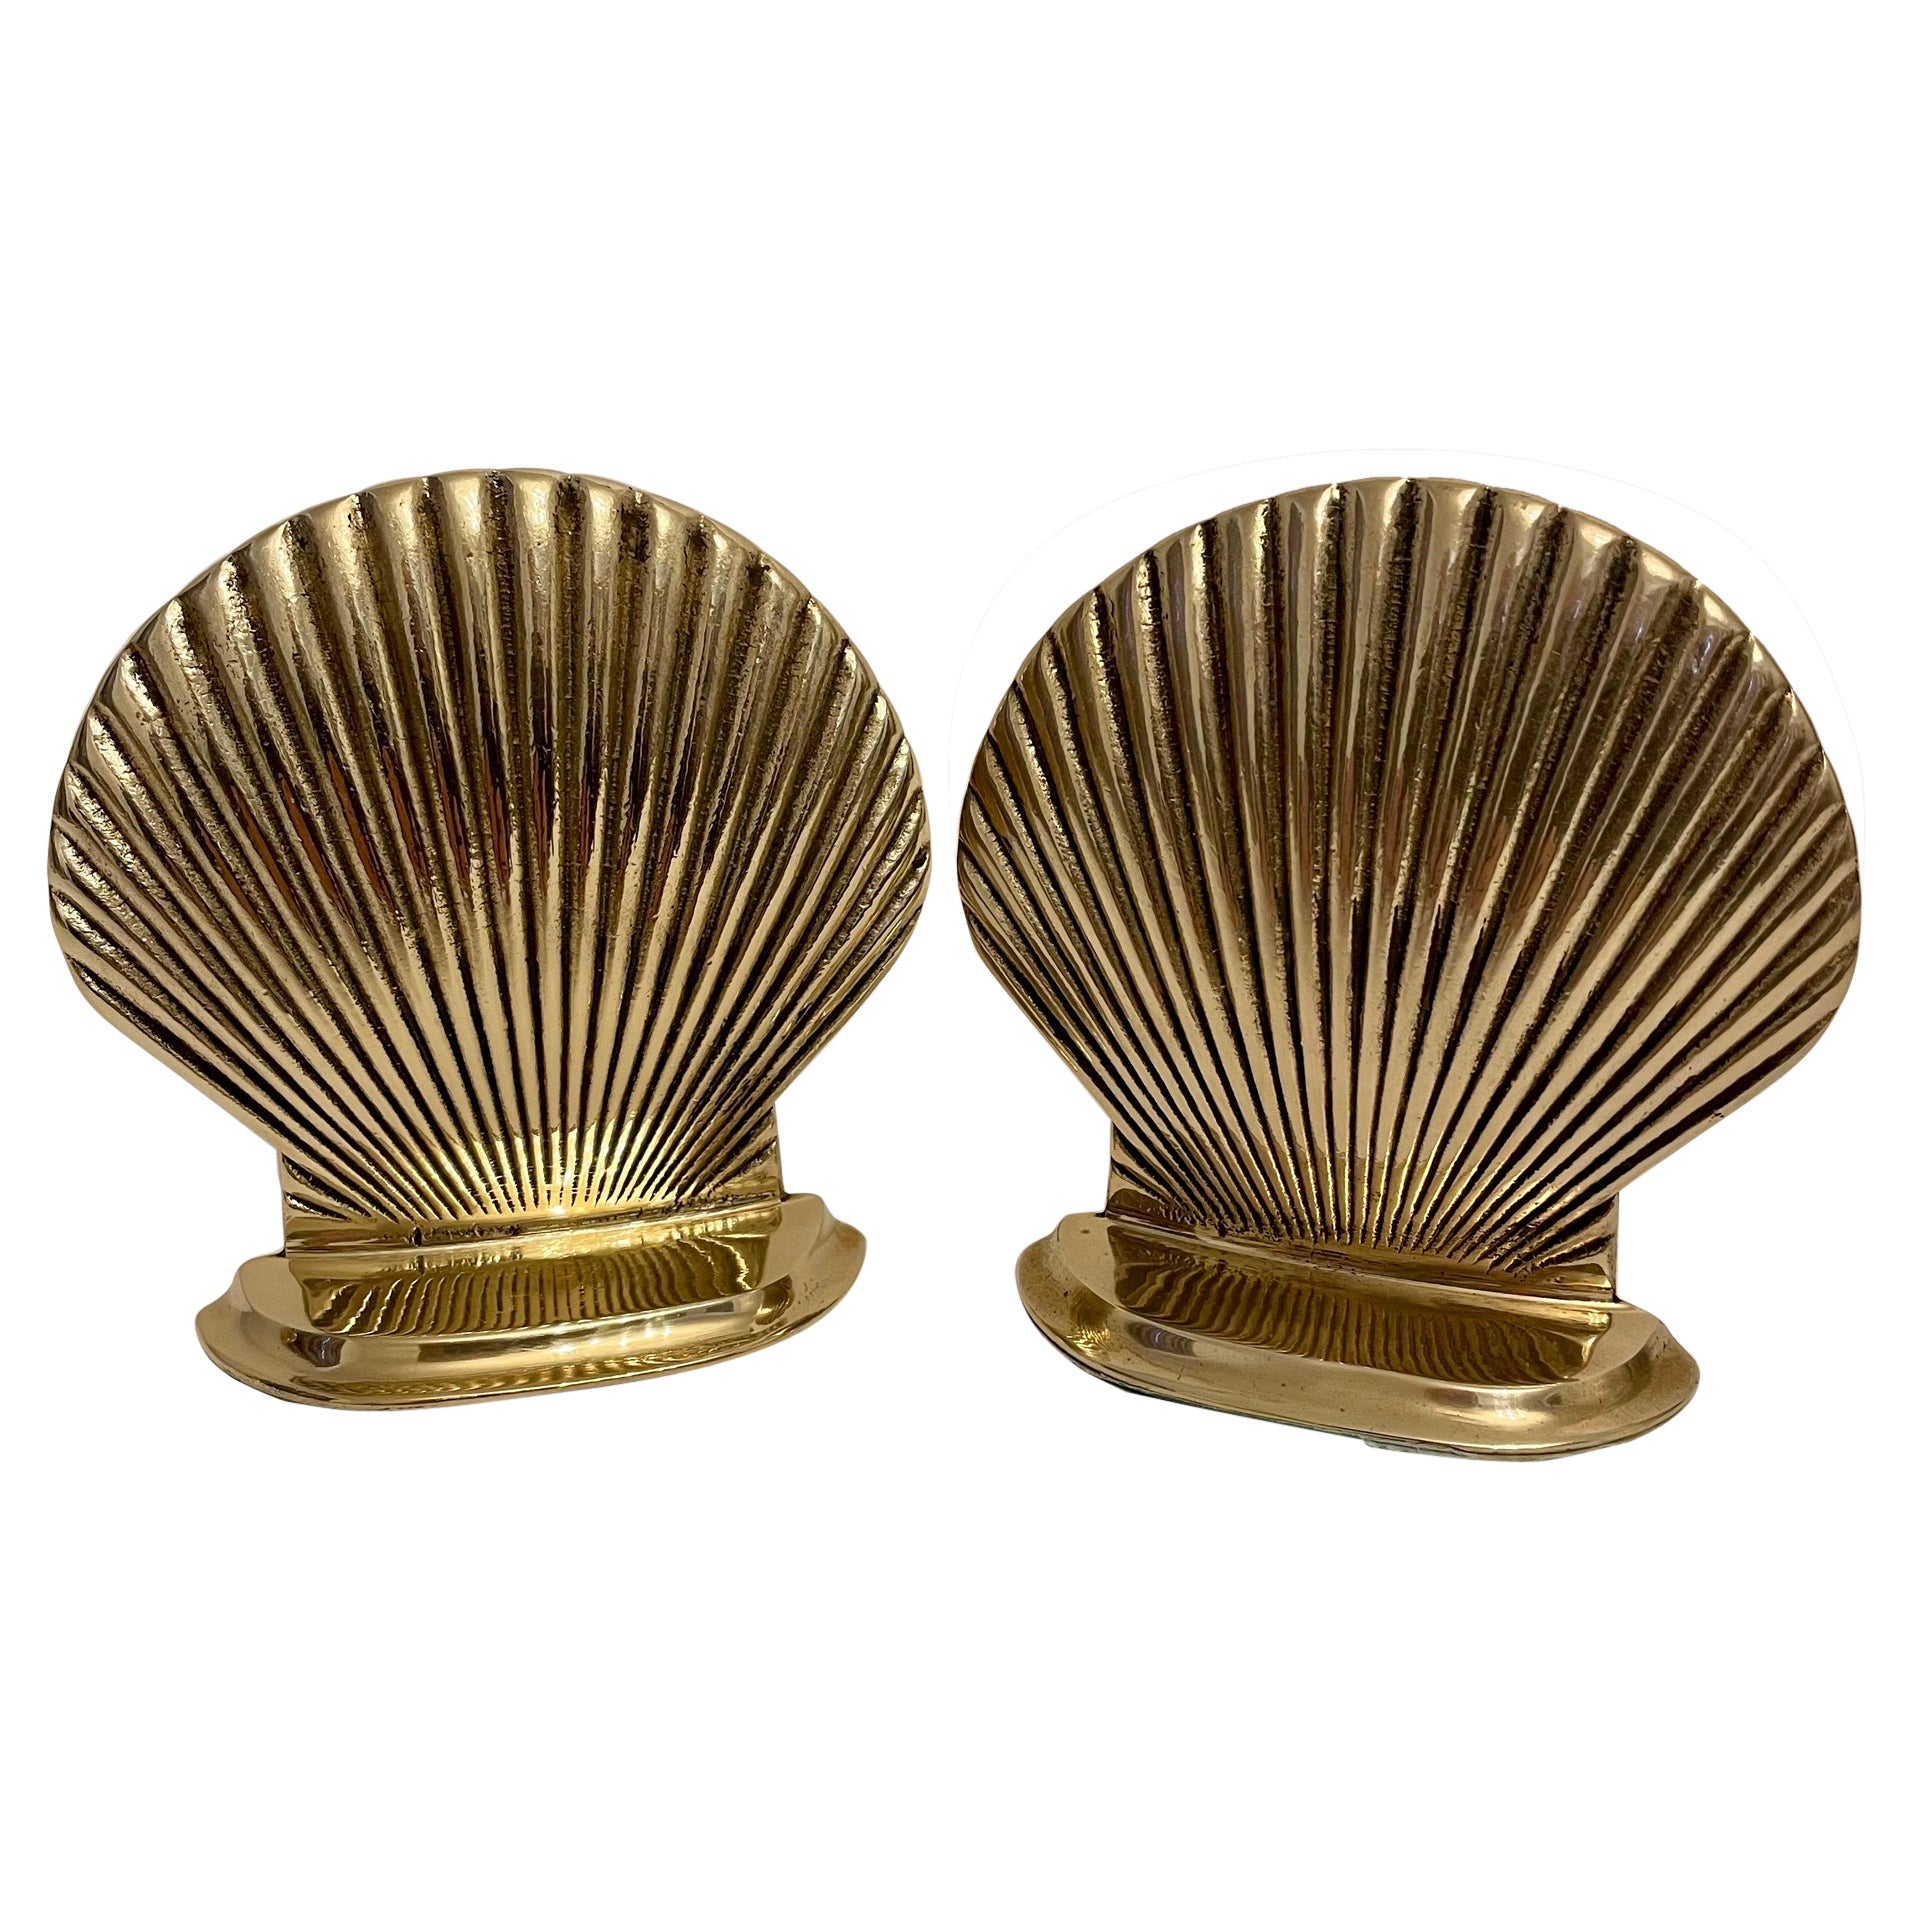 Vintage Brass Clam Shell Seashell Bookends For Sale